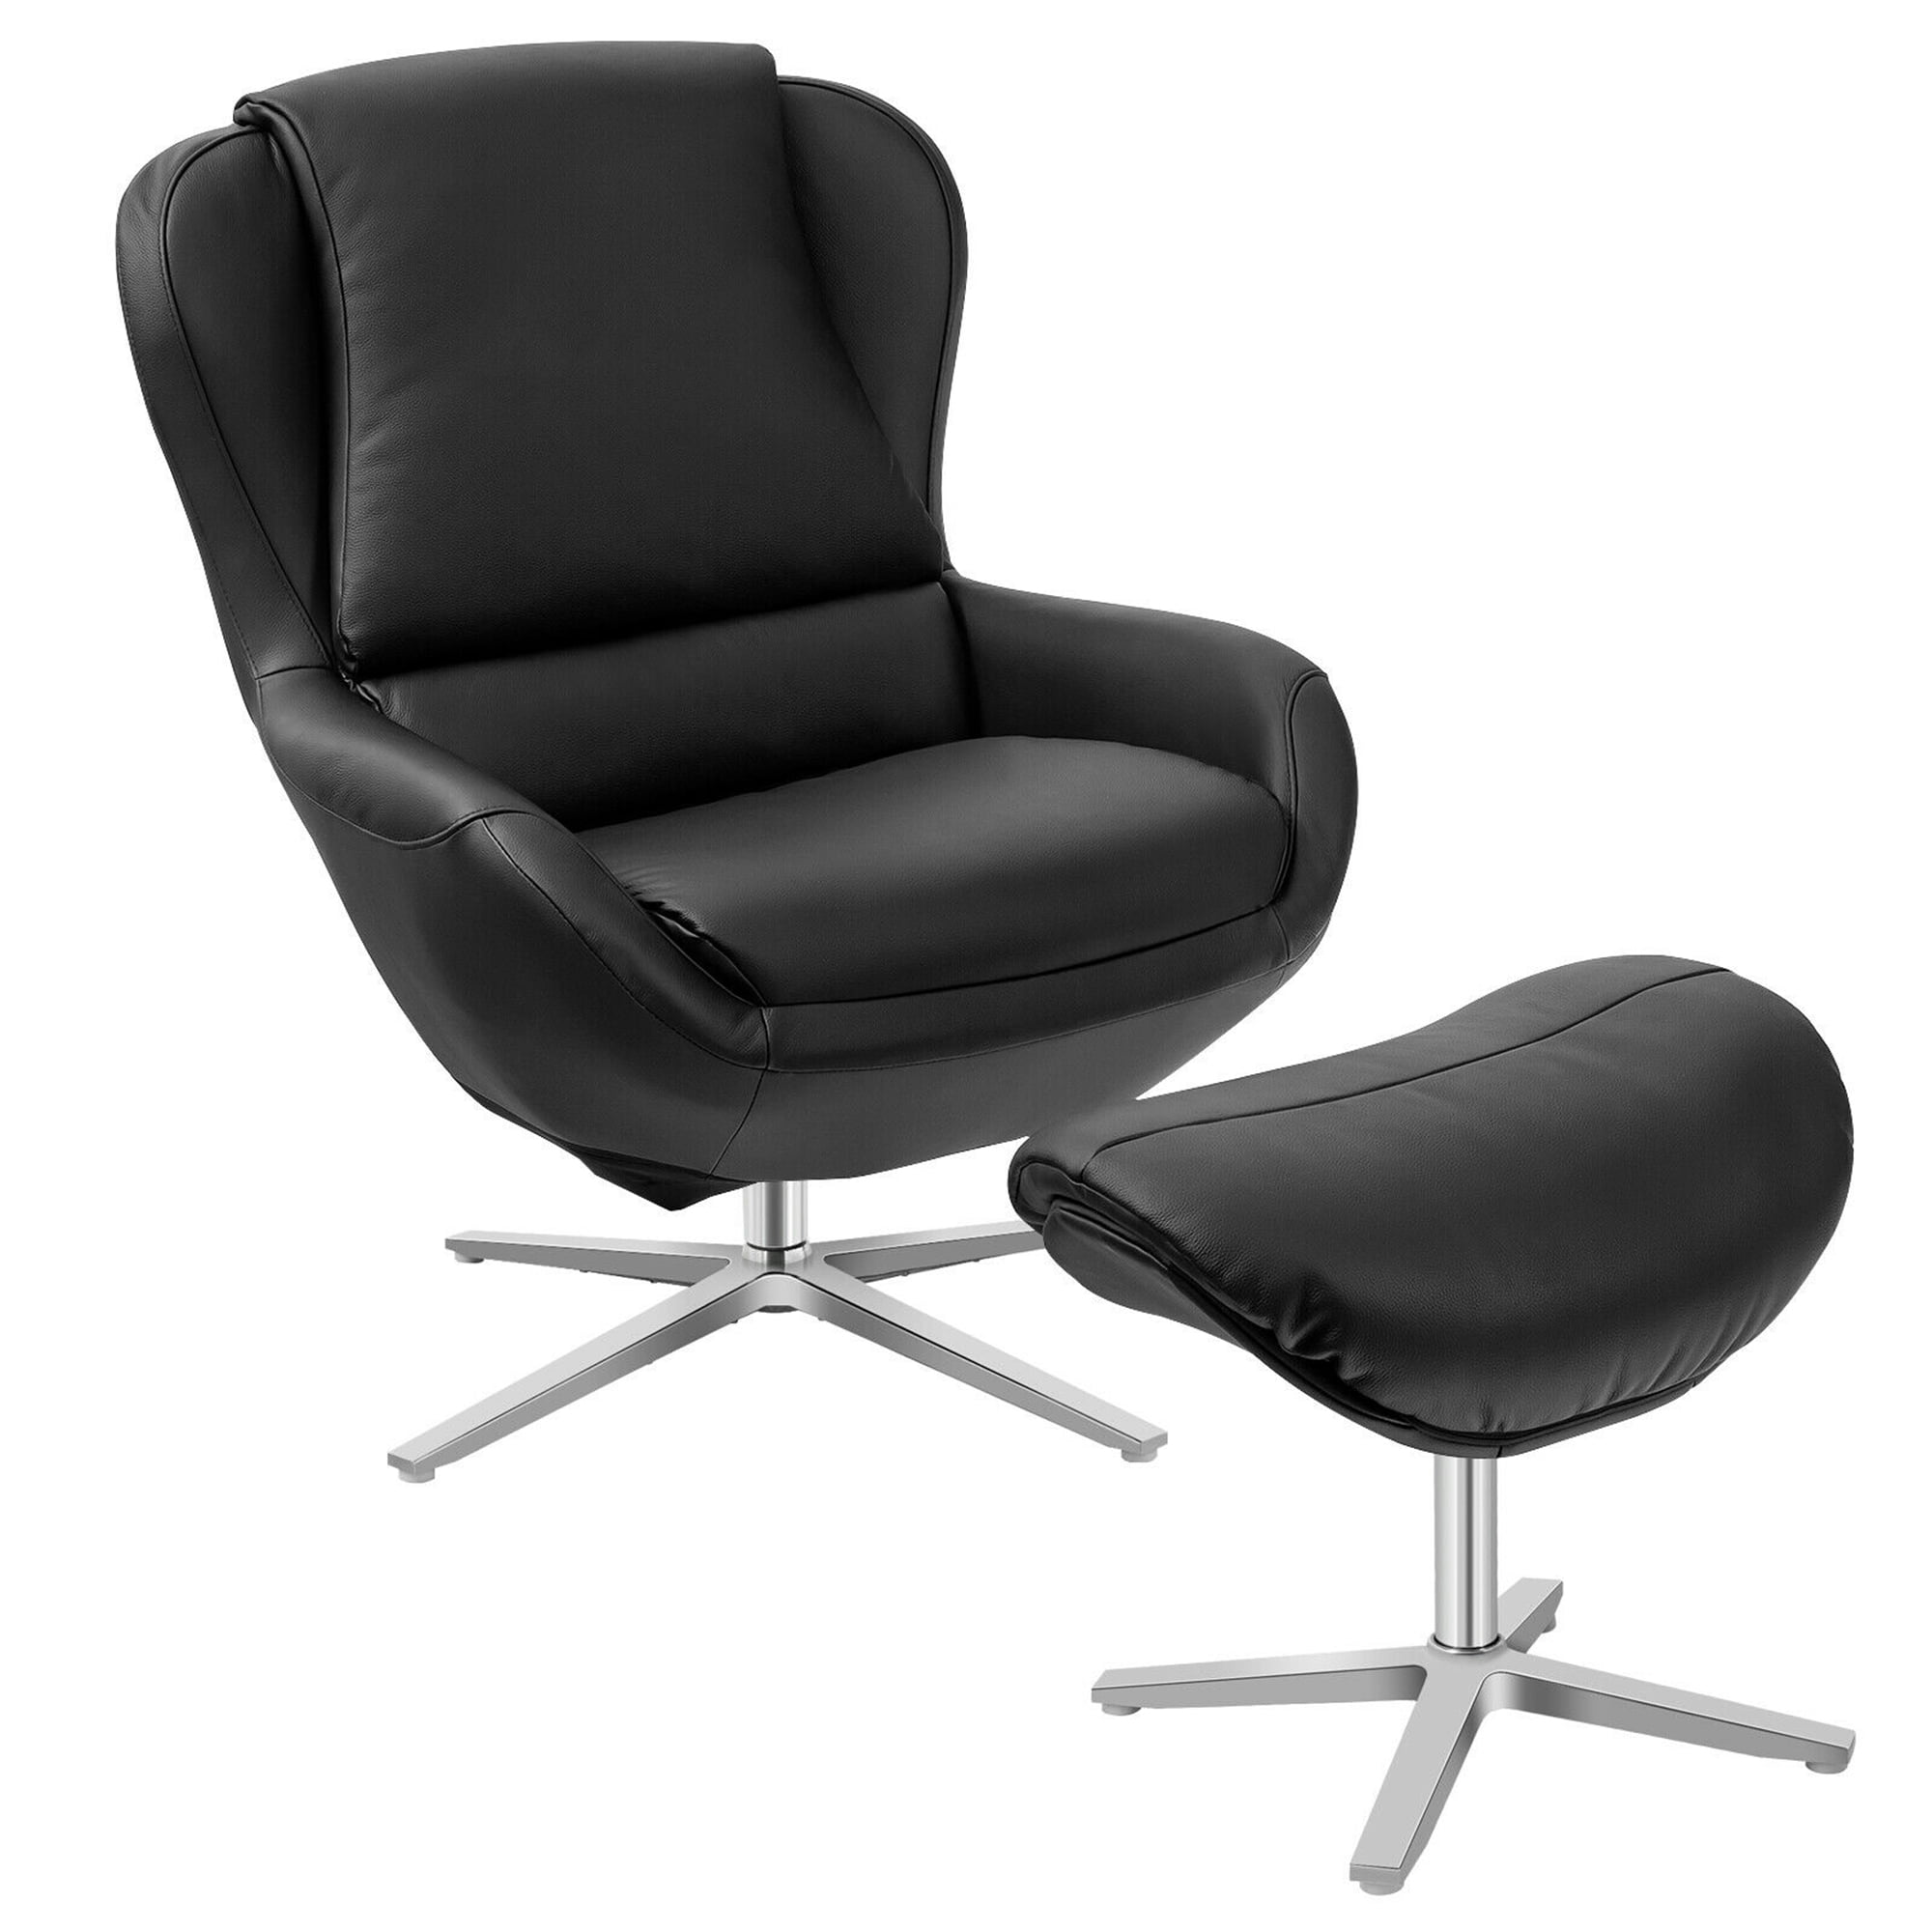 Gymax Swivel Rocking Chair Top Grain, Black Leather Rocking Chair With Ottoman